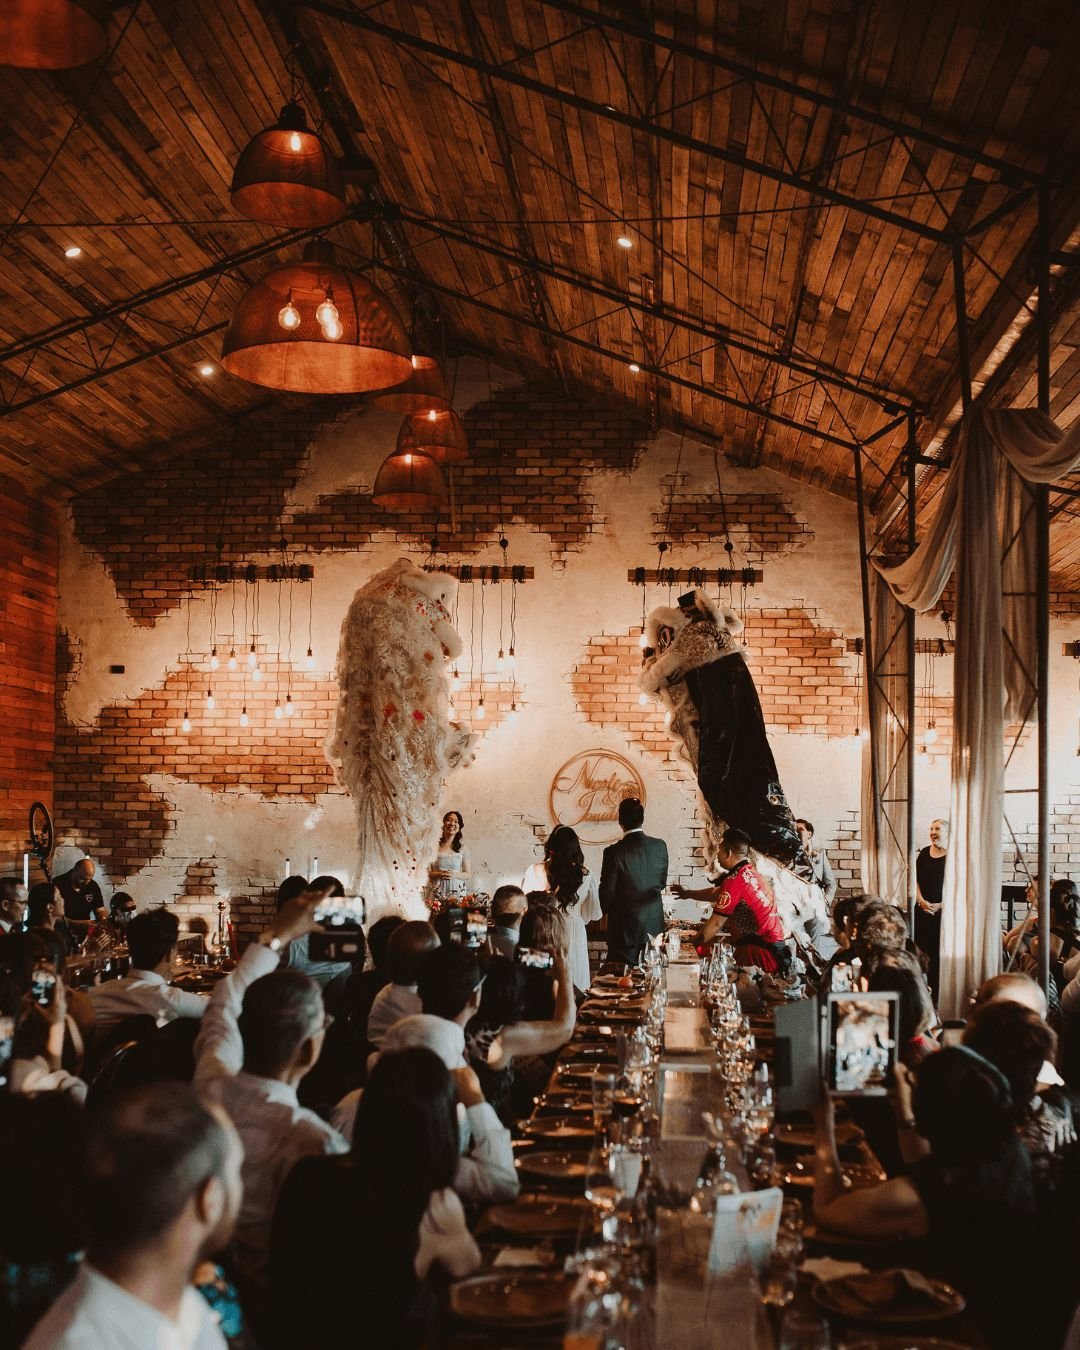 &quot;Just when you thought love couldn't get any more exhilarating, we brought the roar of lion dancers to our wedding at Petrichor Farm! 💖✨ Every leap and drum beat infused our special day with joy, tradition, and a touch of wild fun. Here's to ce